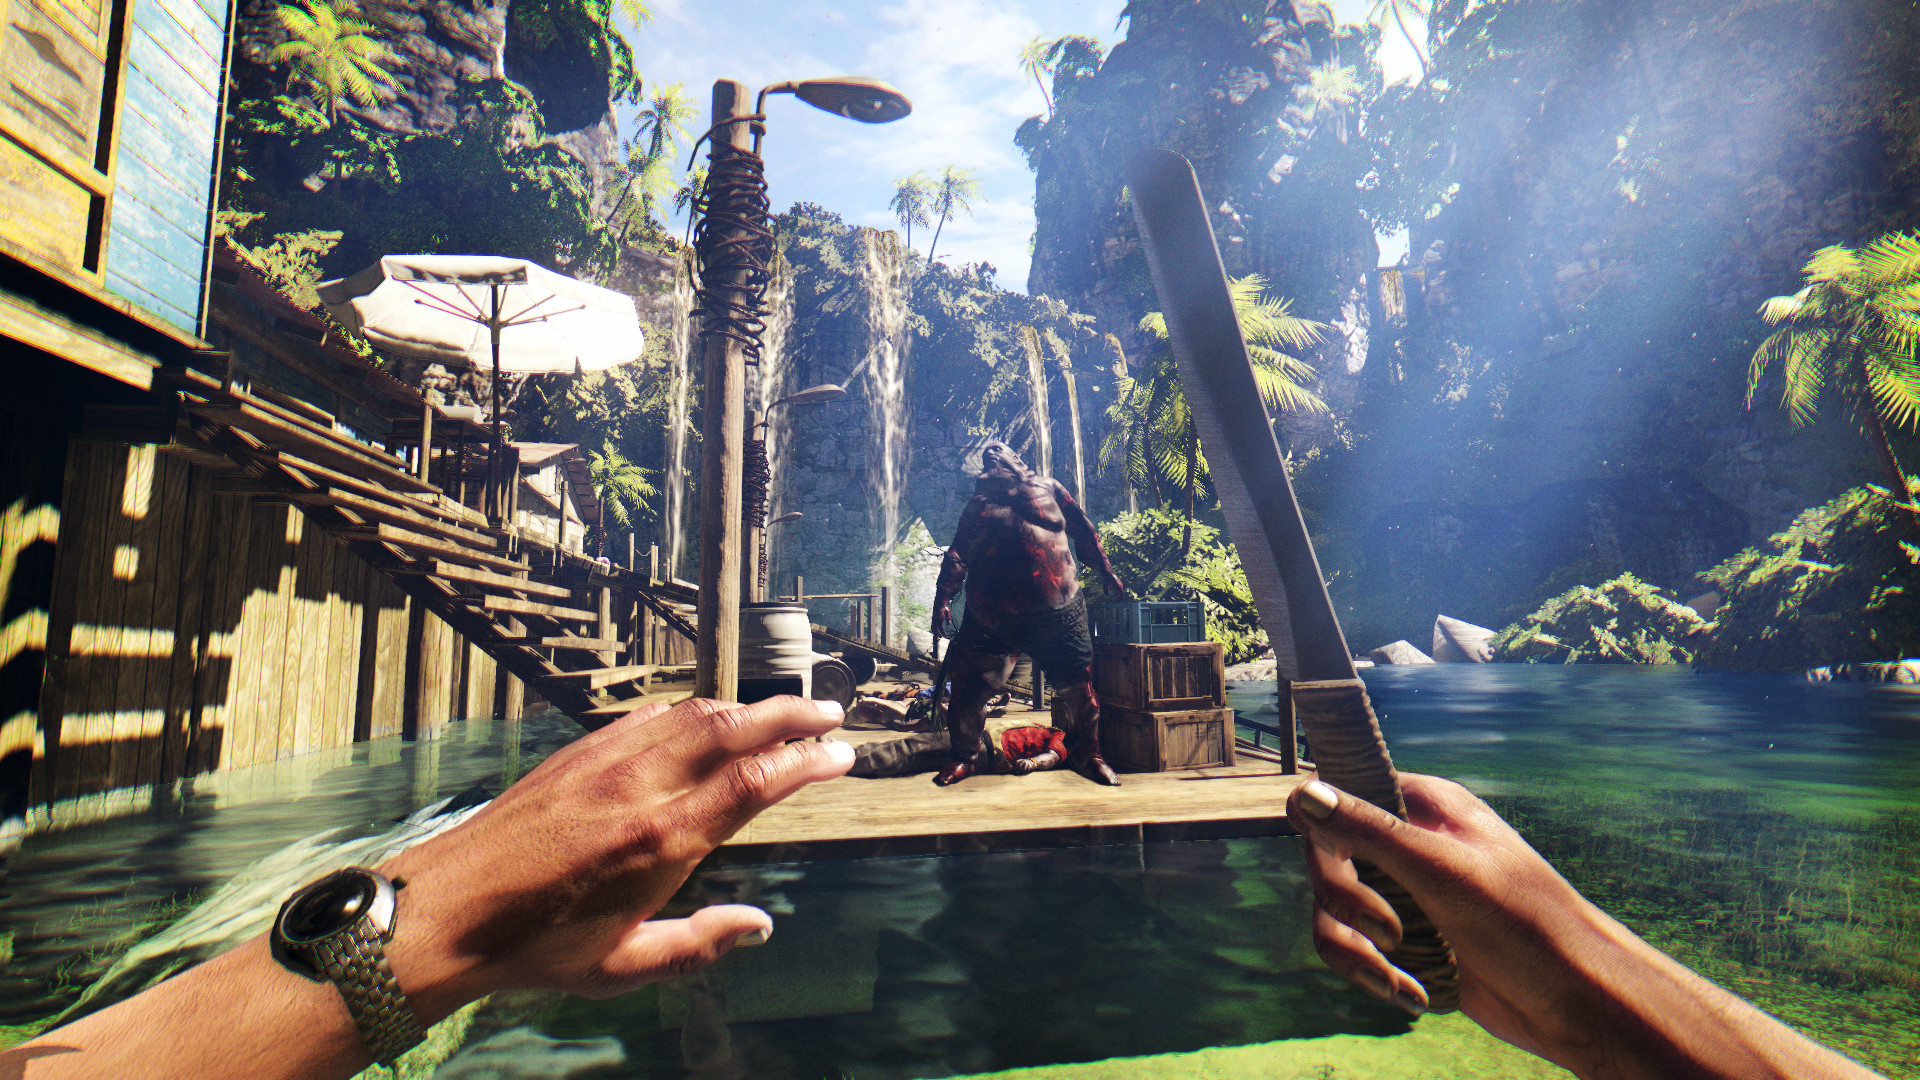 Dead Island Definitive Edition system requirements